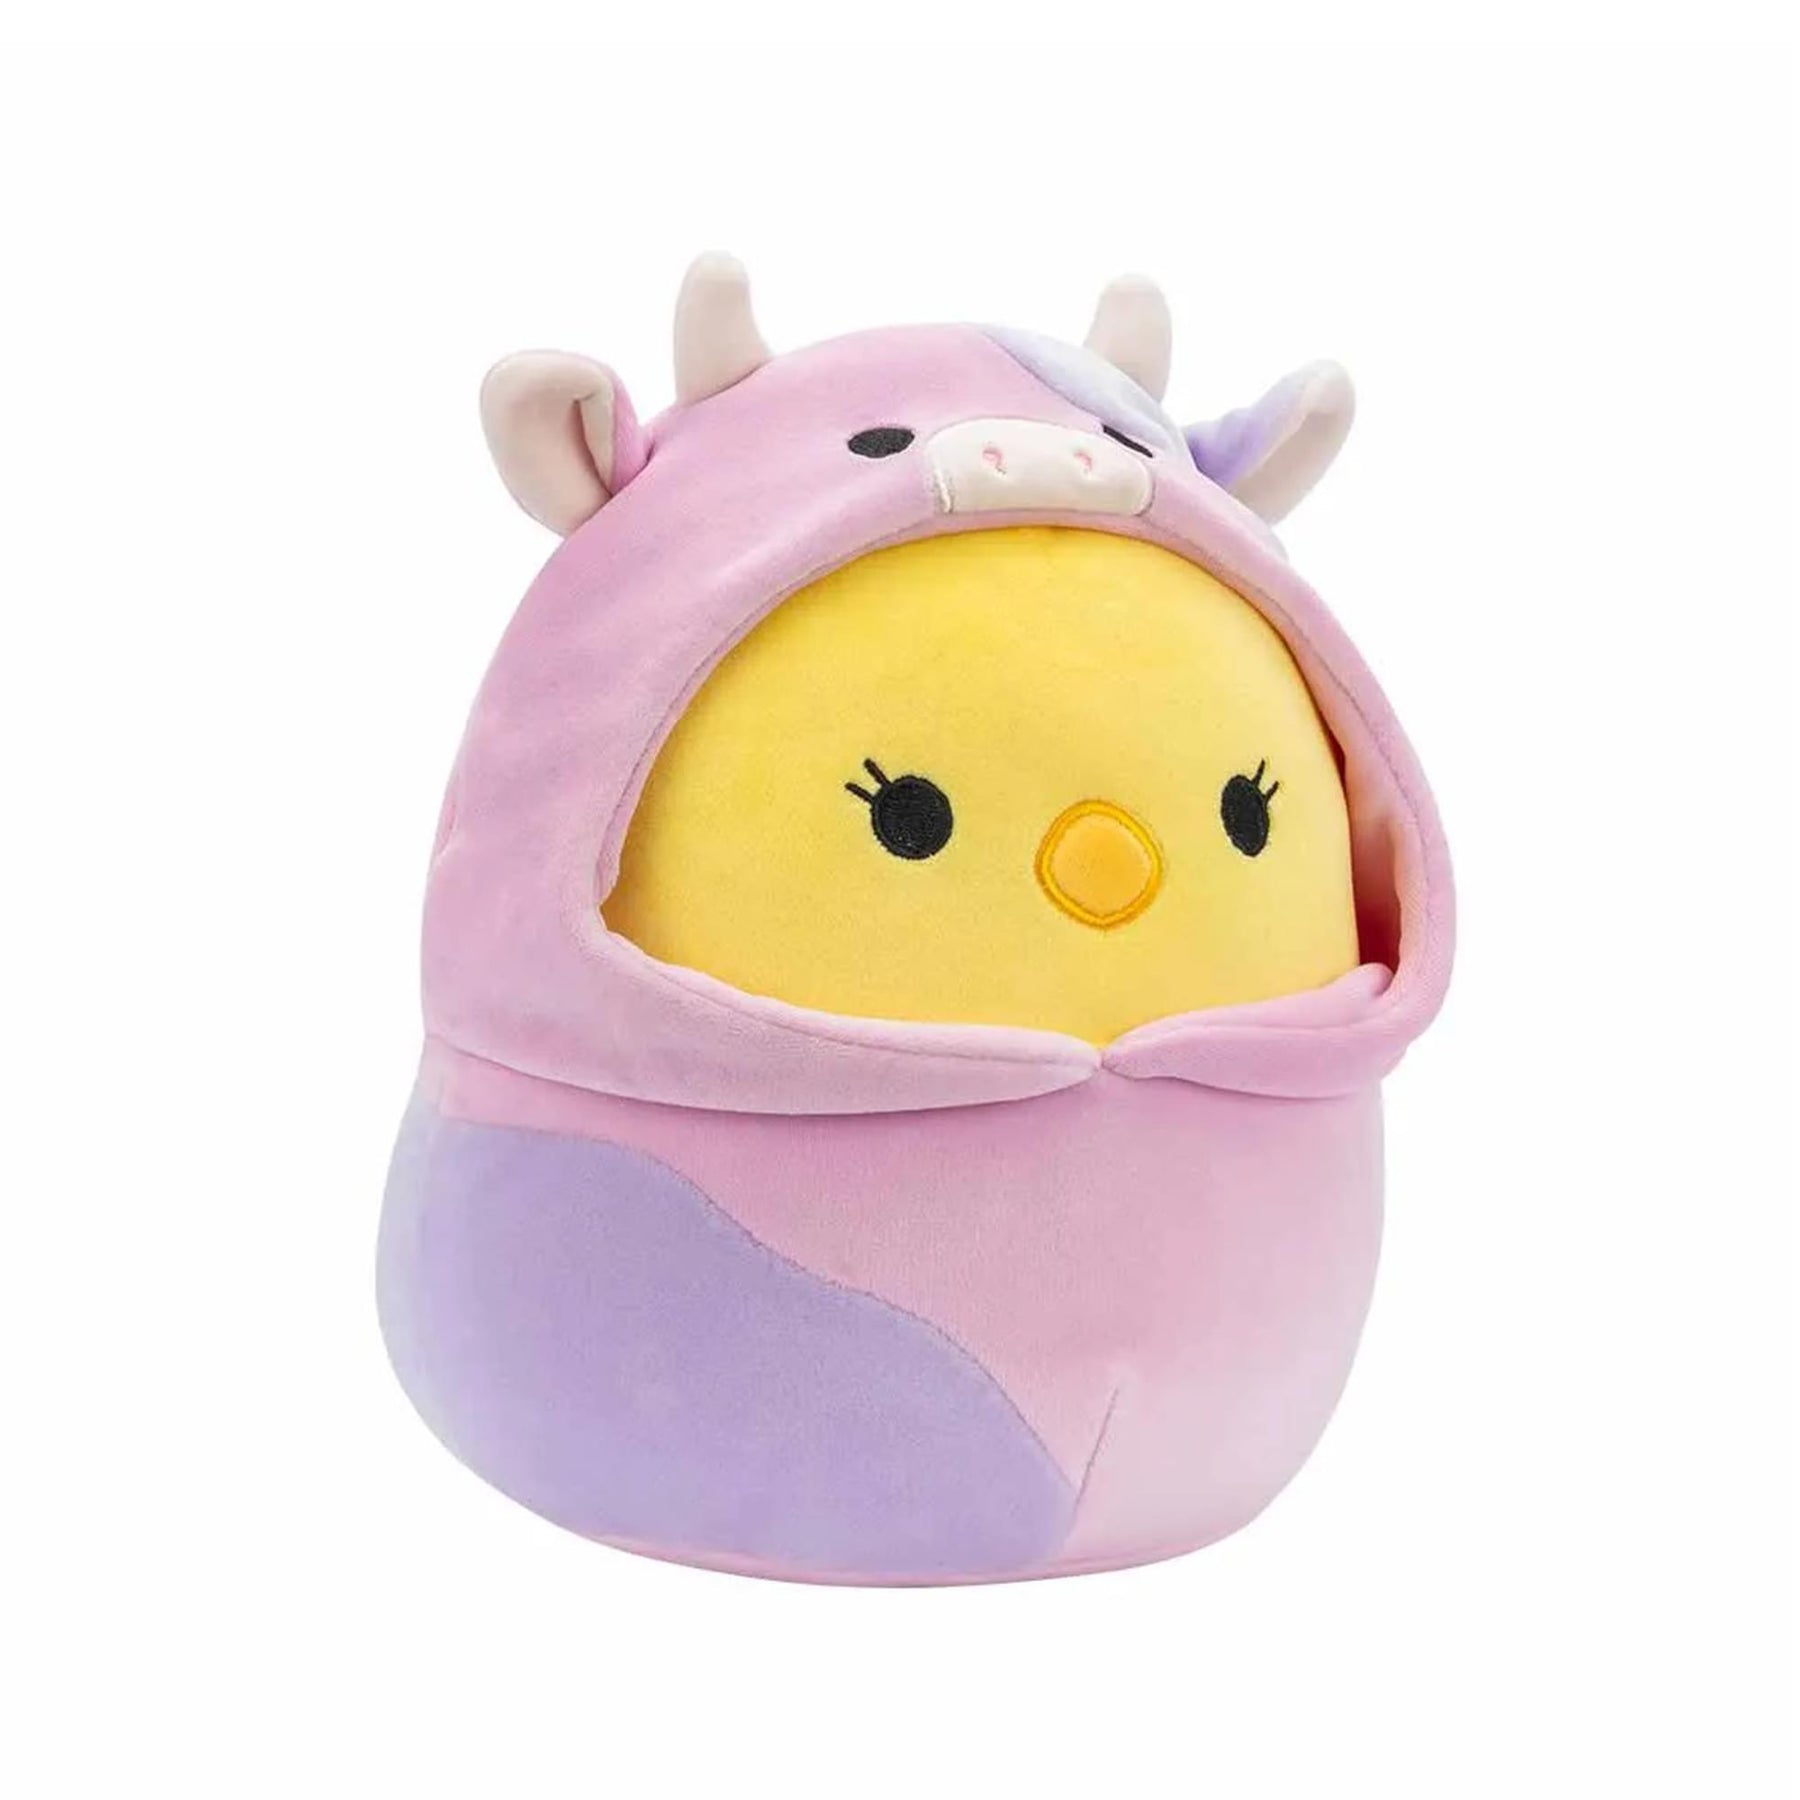 Squishmallows Easter Squad 5 Inch Plush | Aimee the Chick in Cow Hoodie